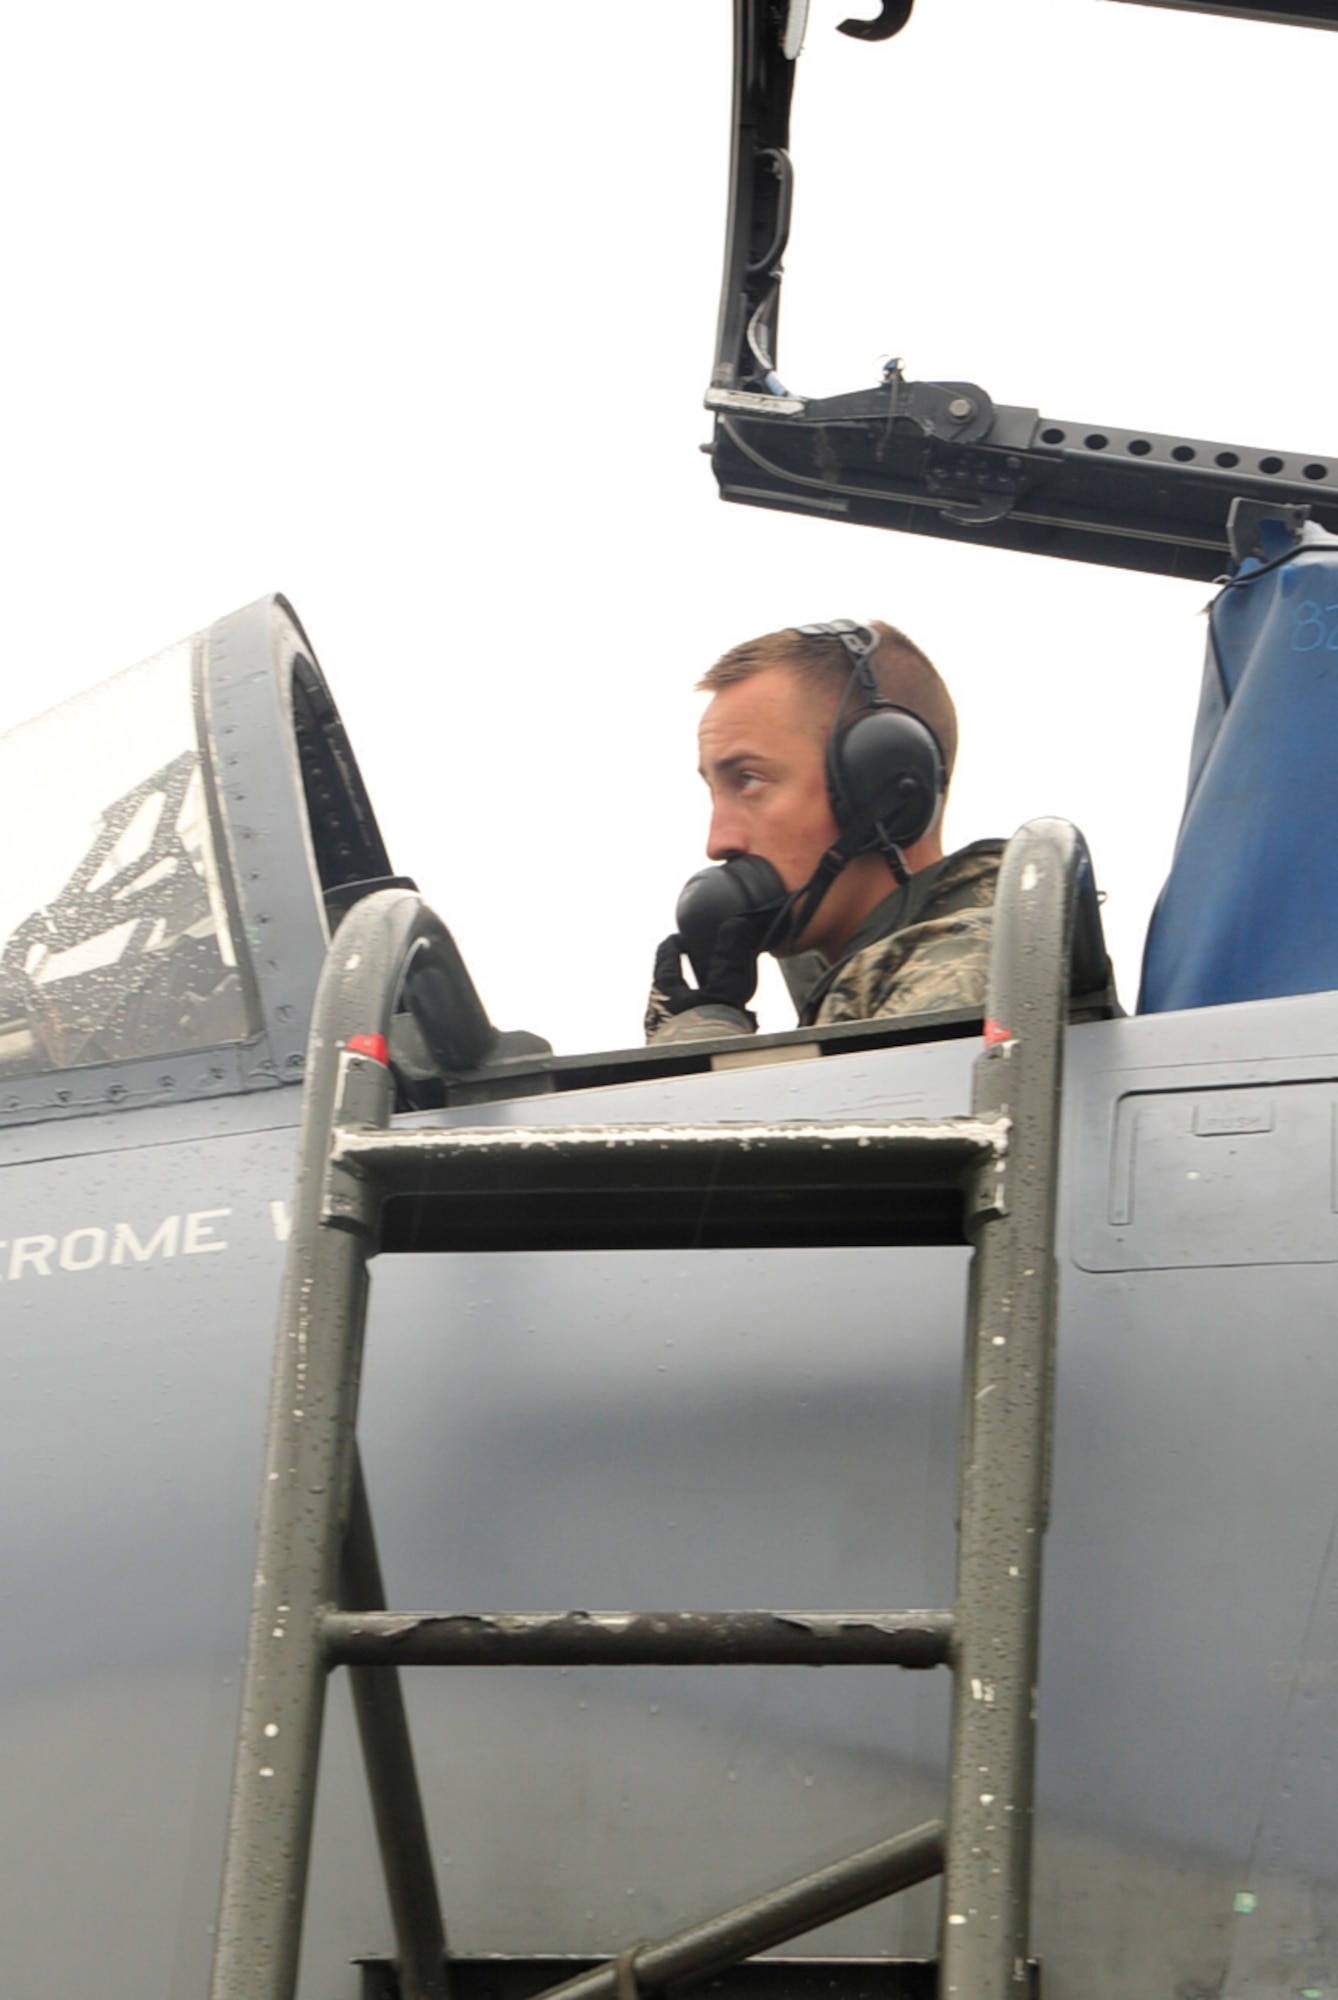 U.S. Air Force Airman 1st Class Cody Weller, a crew chief with the 18th Aircraft Maintenance Squadron, Kadena Air Base, Japan, performs a gear swings check on an F-15 Eagle during the Northern Edge Premier Joint Training Exercise at Eielson Air Force Base, Alaska, June 20. Planning for NE11 began in August of 2010 with exercise experts and planners throughout U.S. Pacific Command and the continental United States. (U.S. Air Force photo/ Staff Sgt. Lakisha A. Croley)